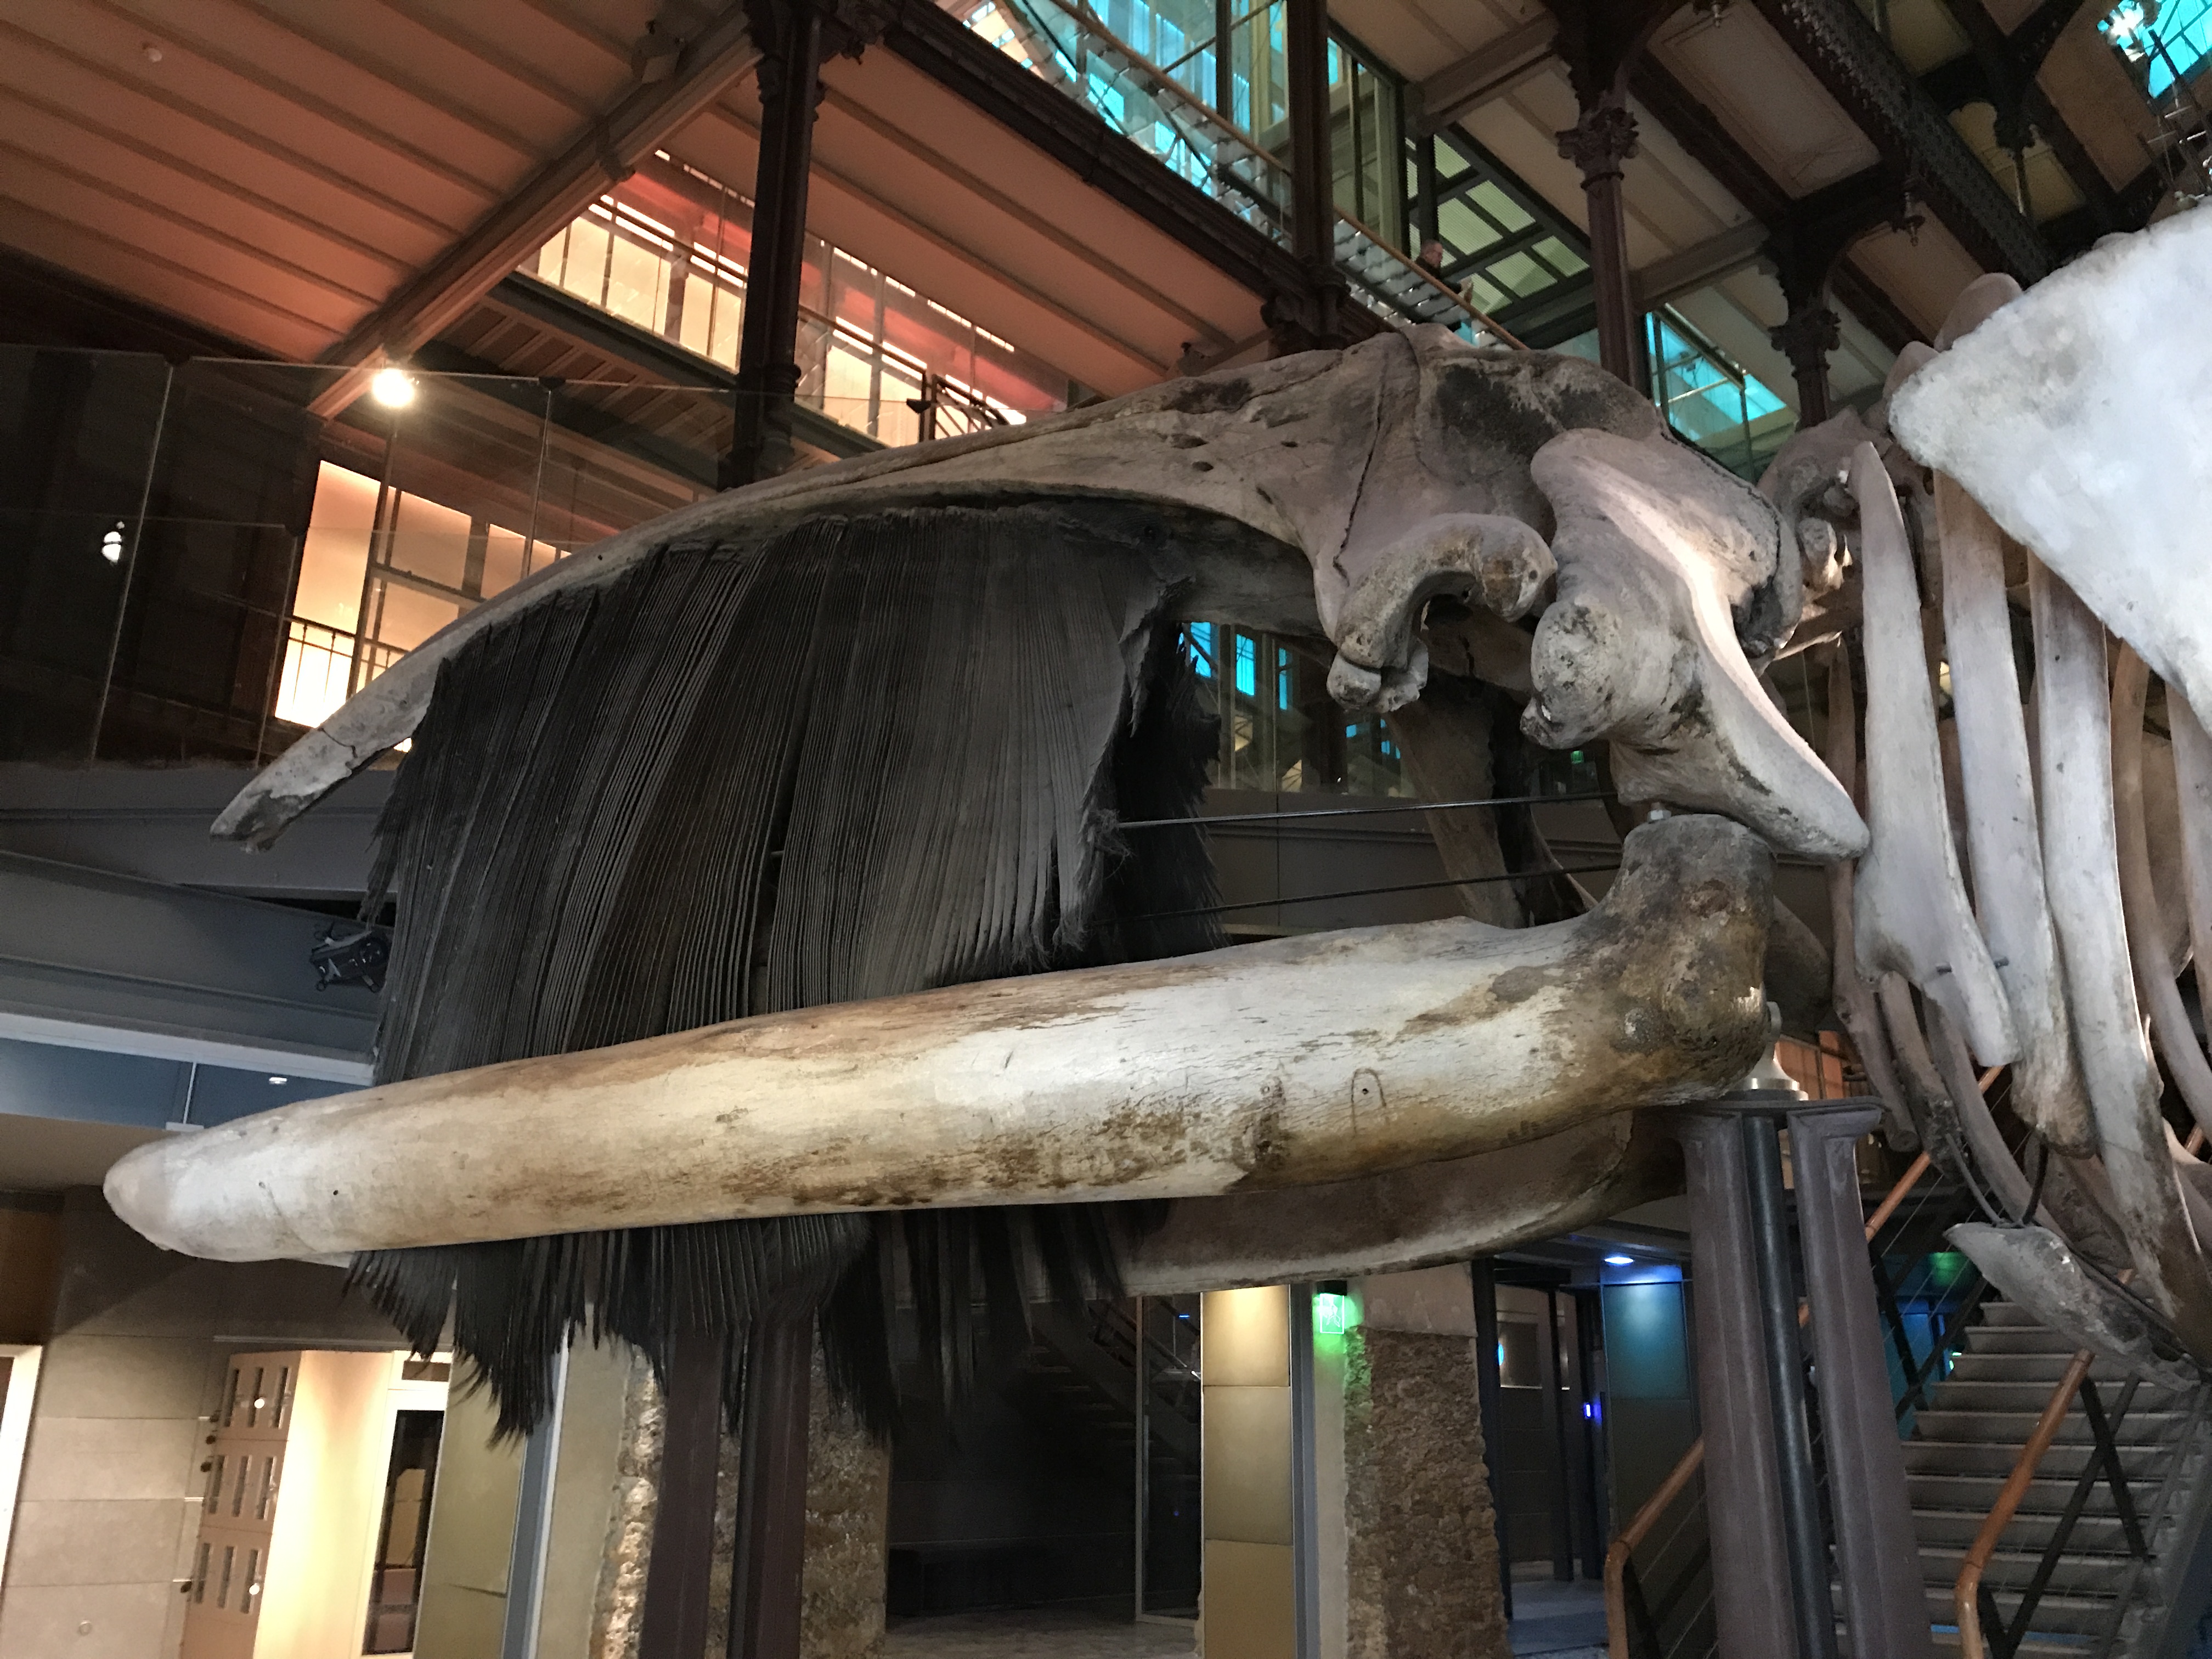 Gentle Giants - Baleen Whales Are Just One of the Massive Creatures that Are on Exhibit at the Grande Galerie de L'Évolution in Paris, France